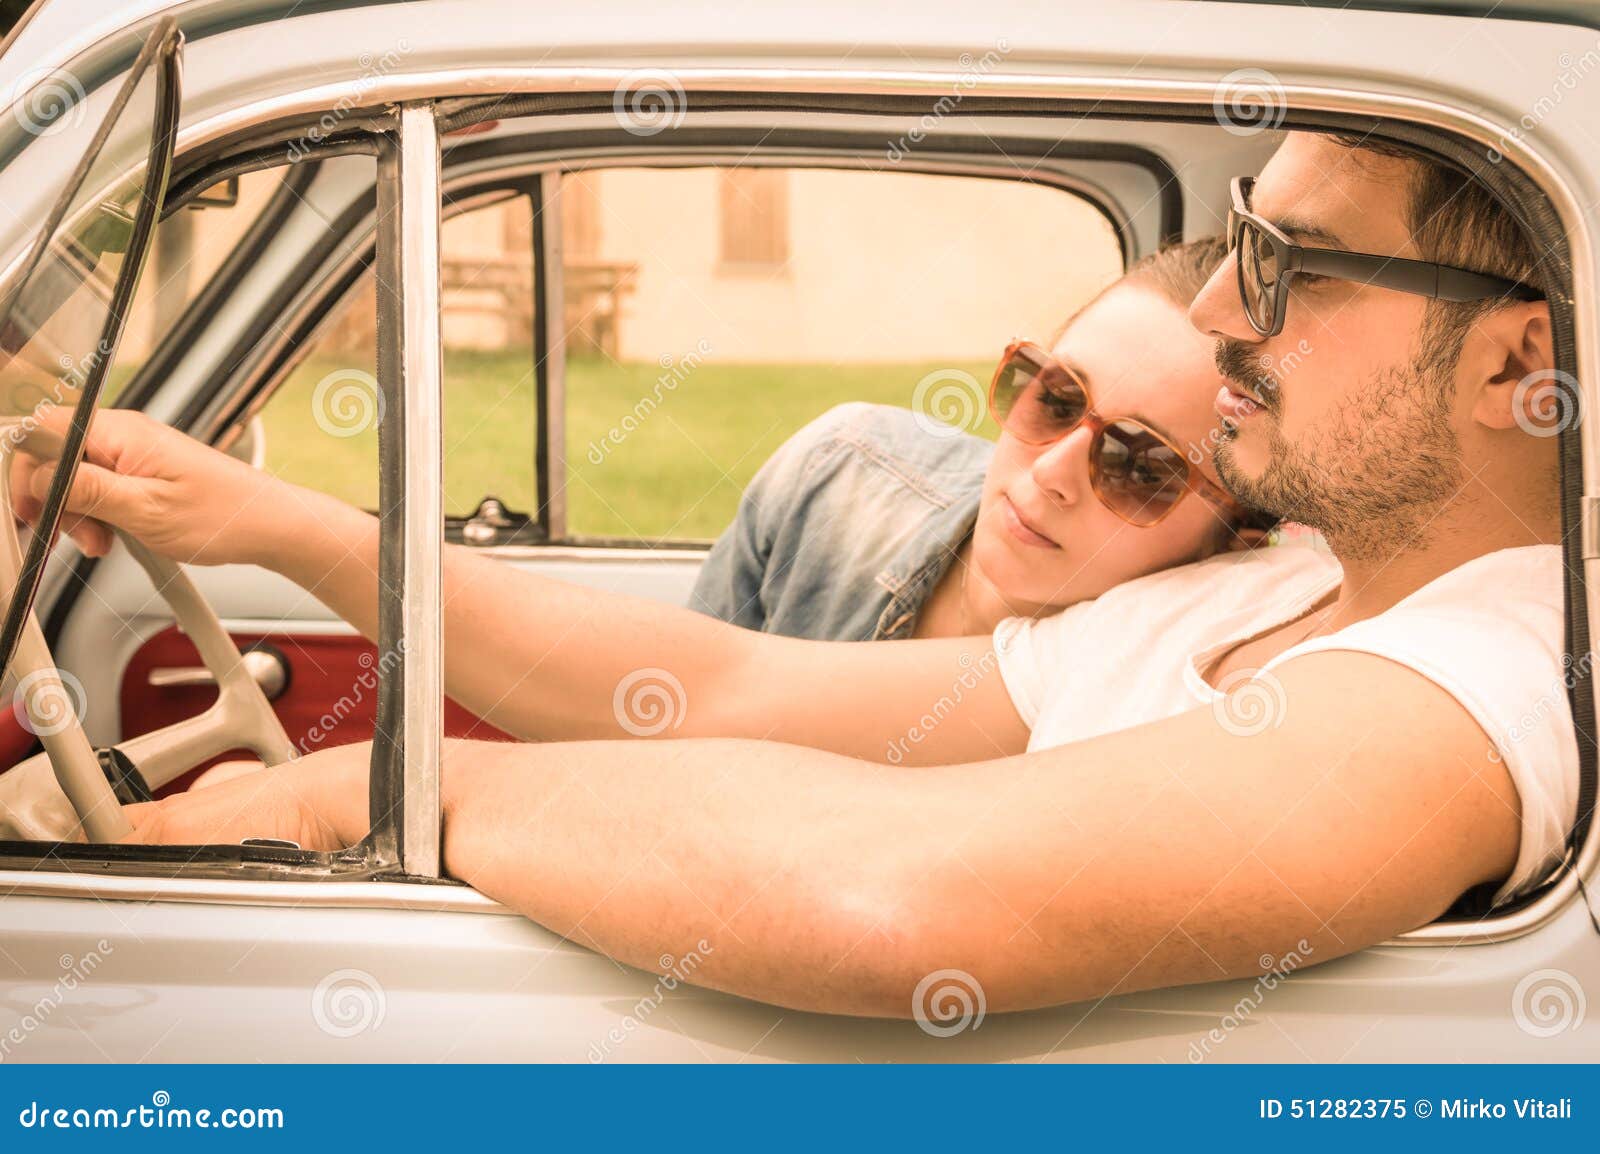 couple in love having a rest during honeymoon vintage car trip